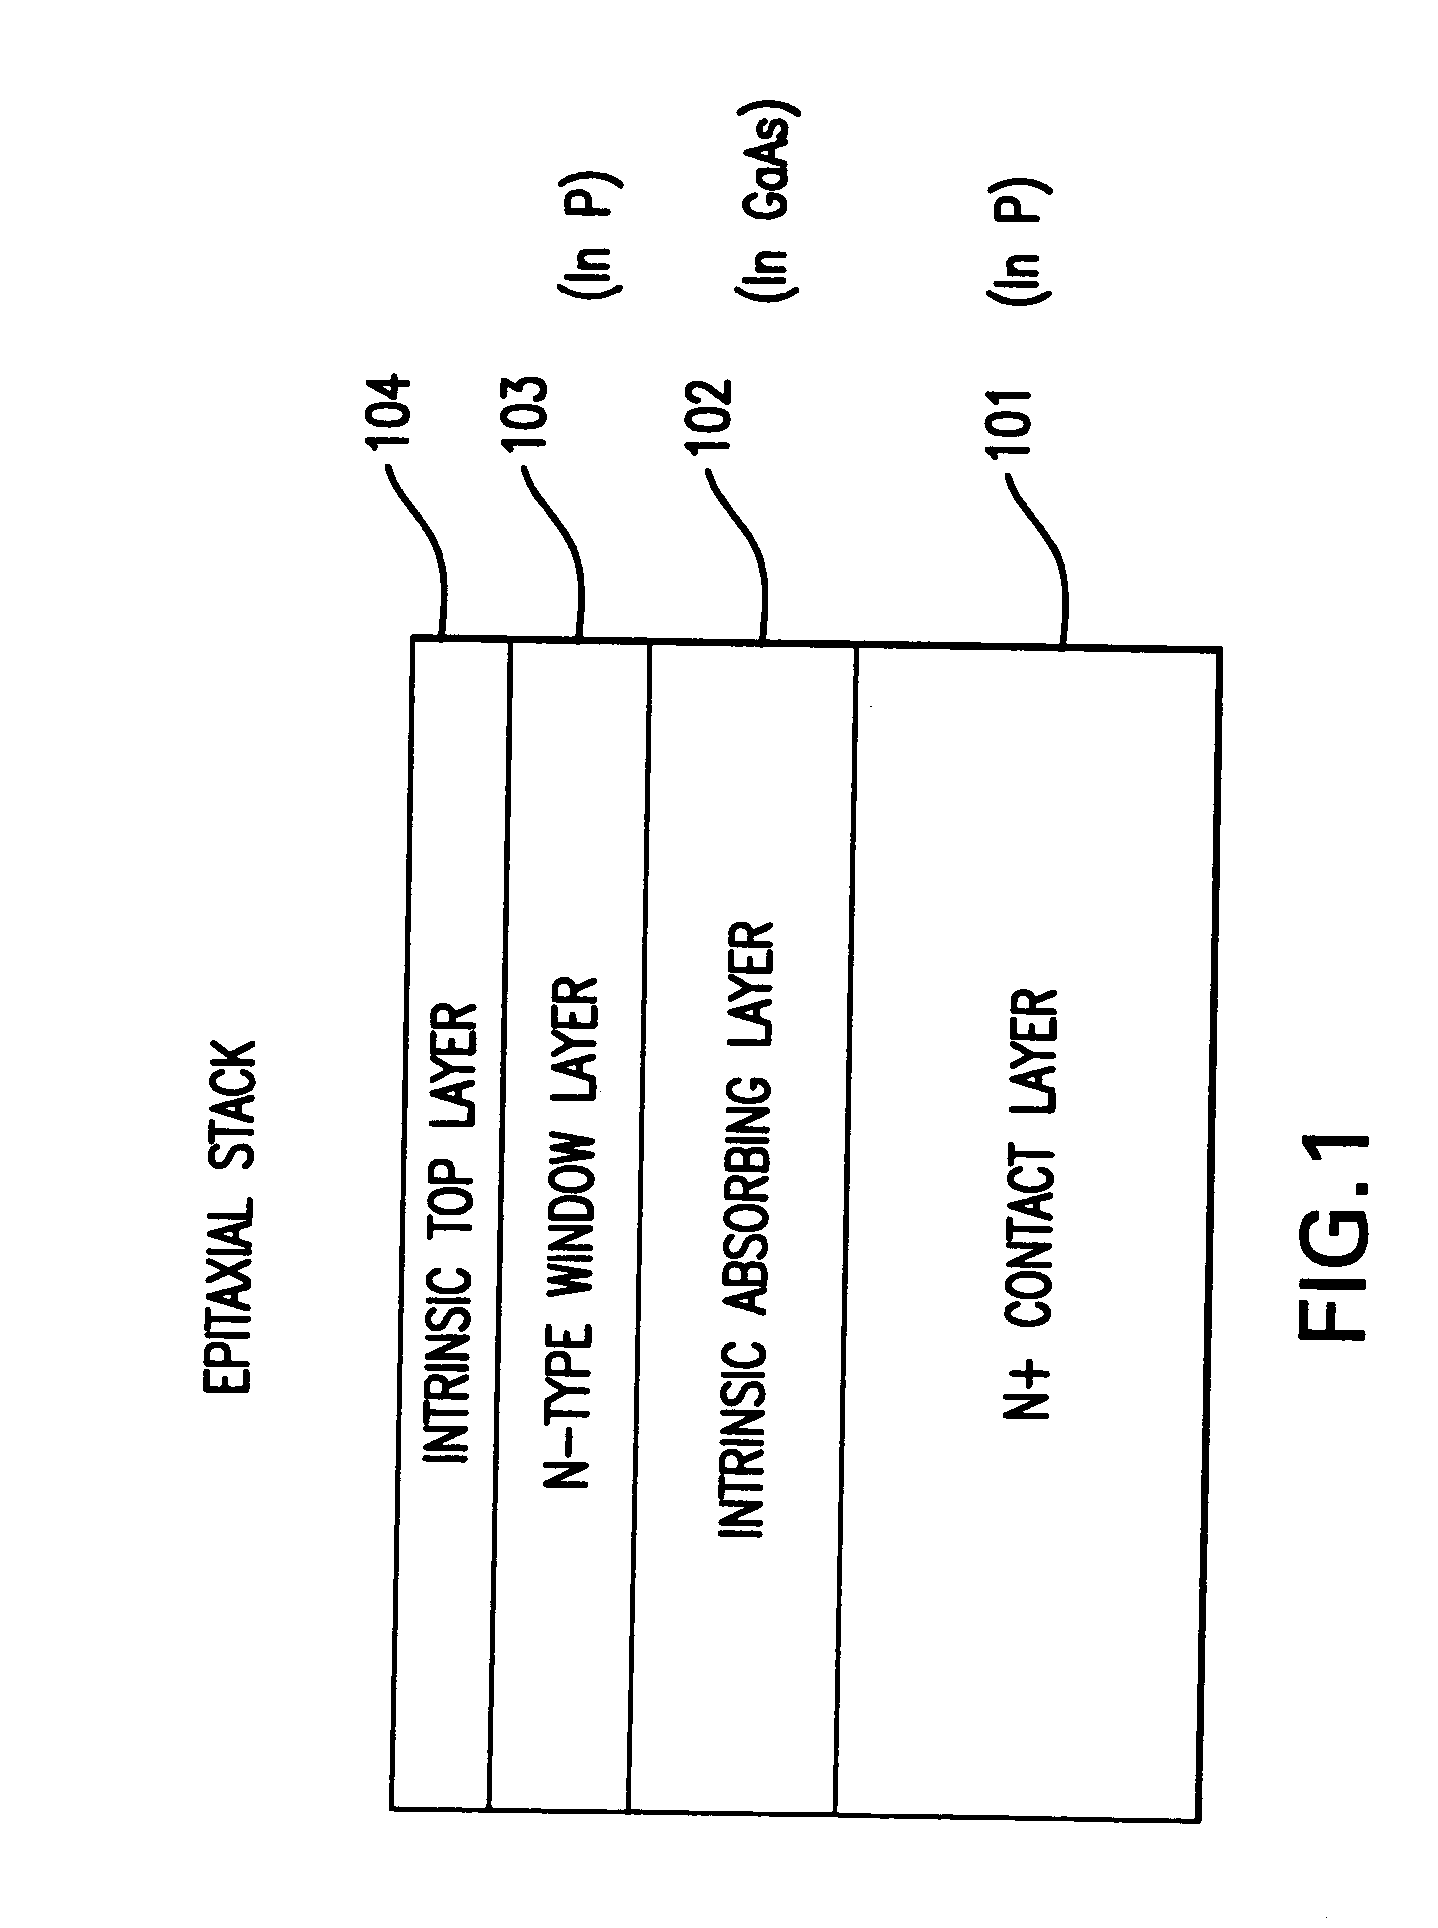 PIN diode structure with zinc diffusion region